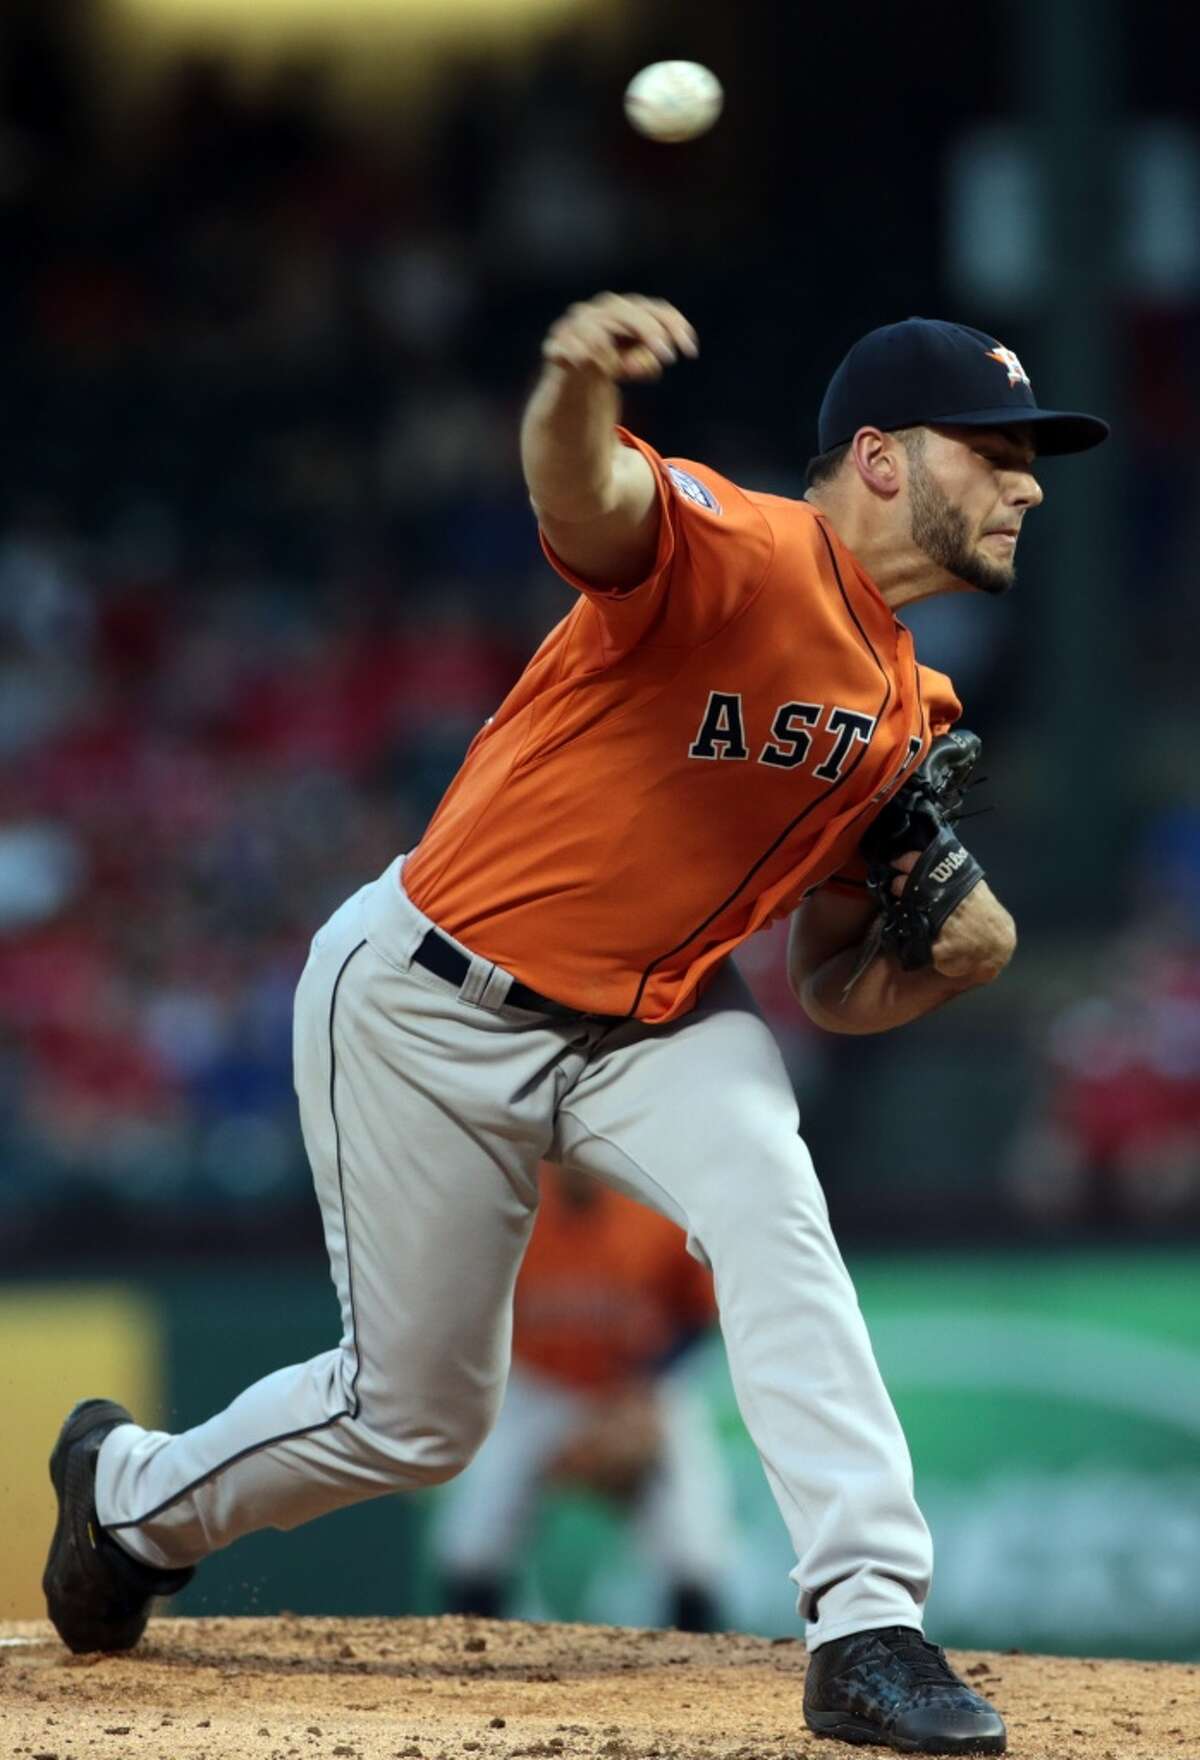 ARLINGTON, TX - SEPTEMBER 17: Lance McCullers #43 of the Houston Astros throws in the first inning against the Texas Rangers at Global Life Park in Arlington on September 17, 2015 in Arlington, Texas. (Photo by Rick Yeatts/Getty Images)